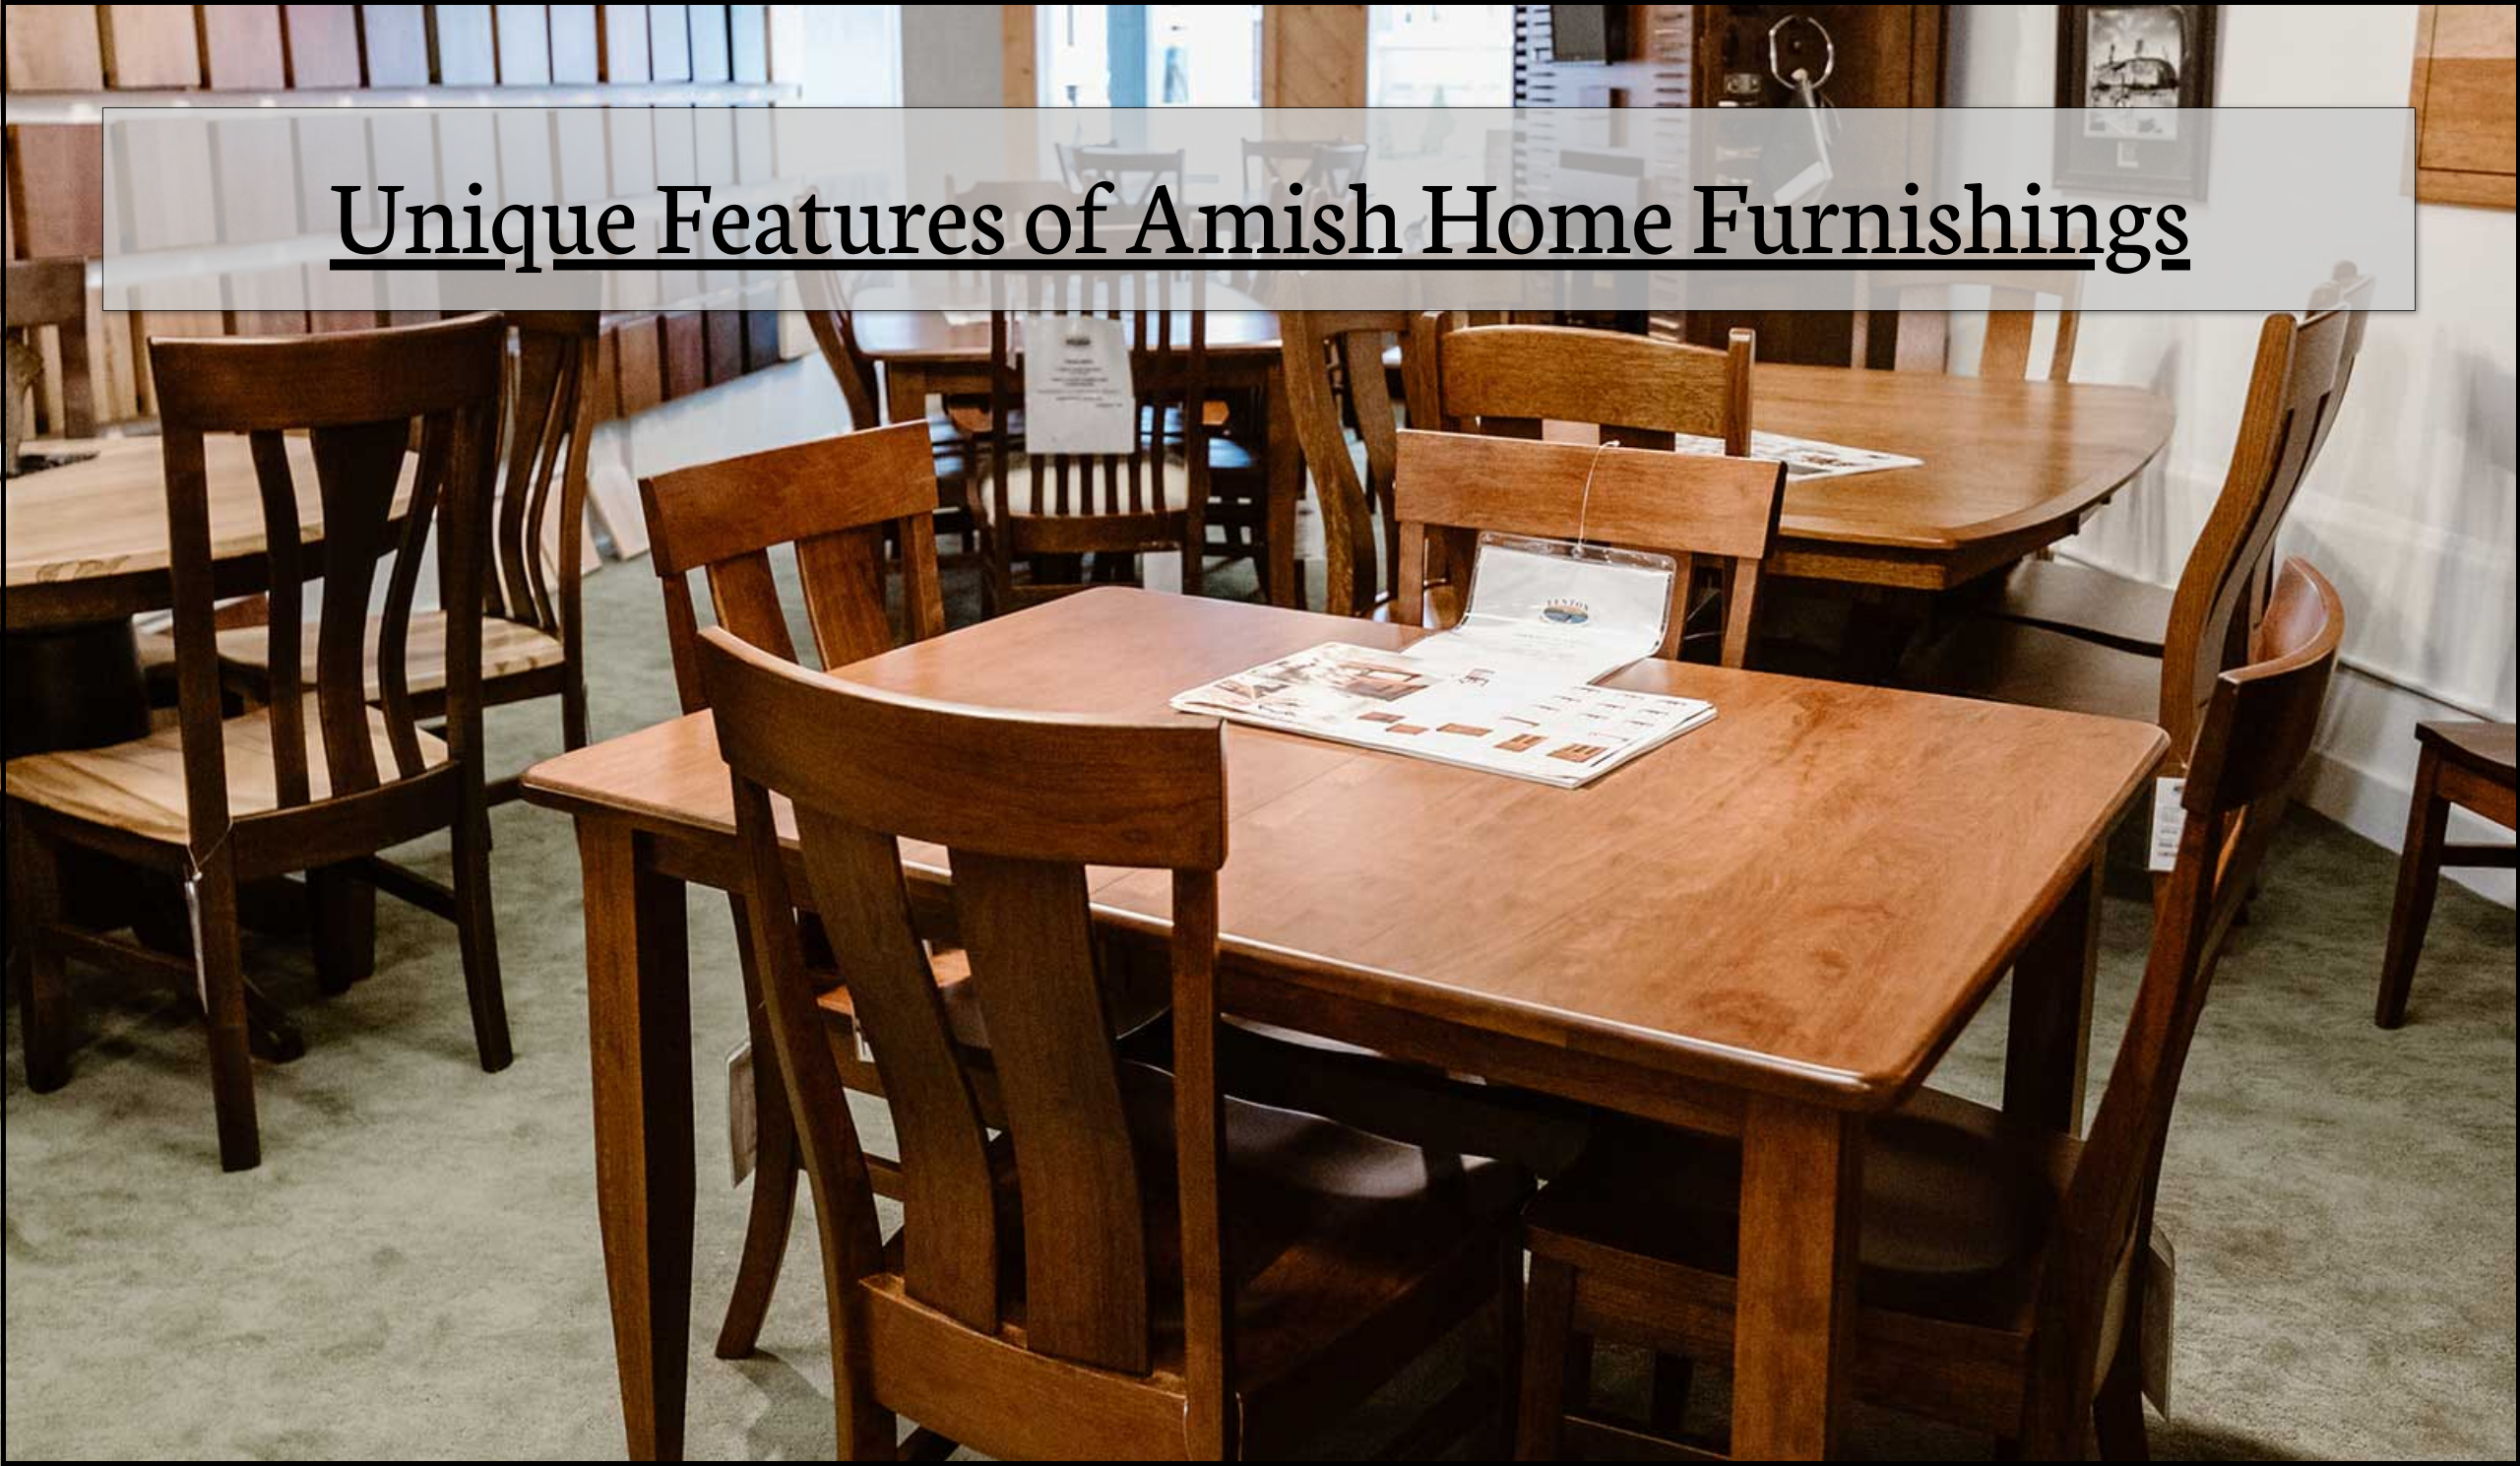 3 Unique Features of Amish Home Furnishings – June 2021-Max-Quality